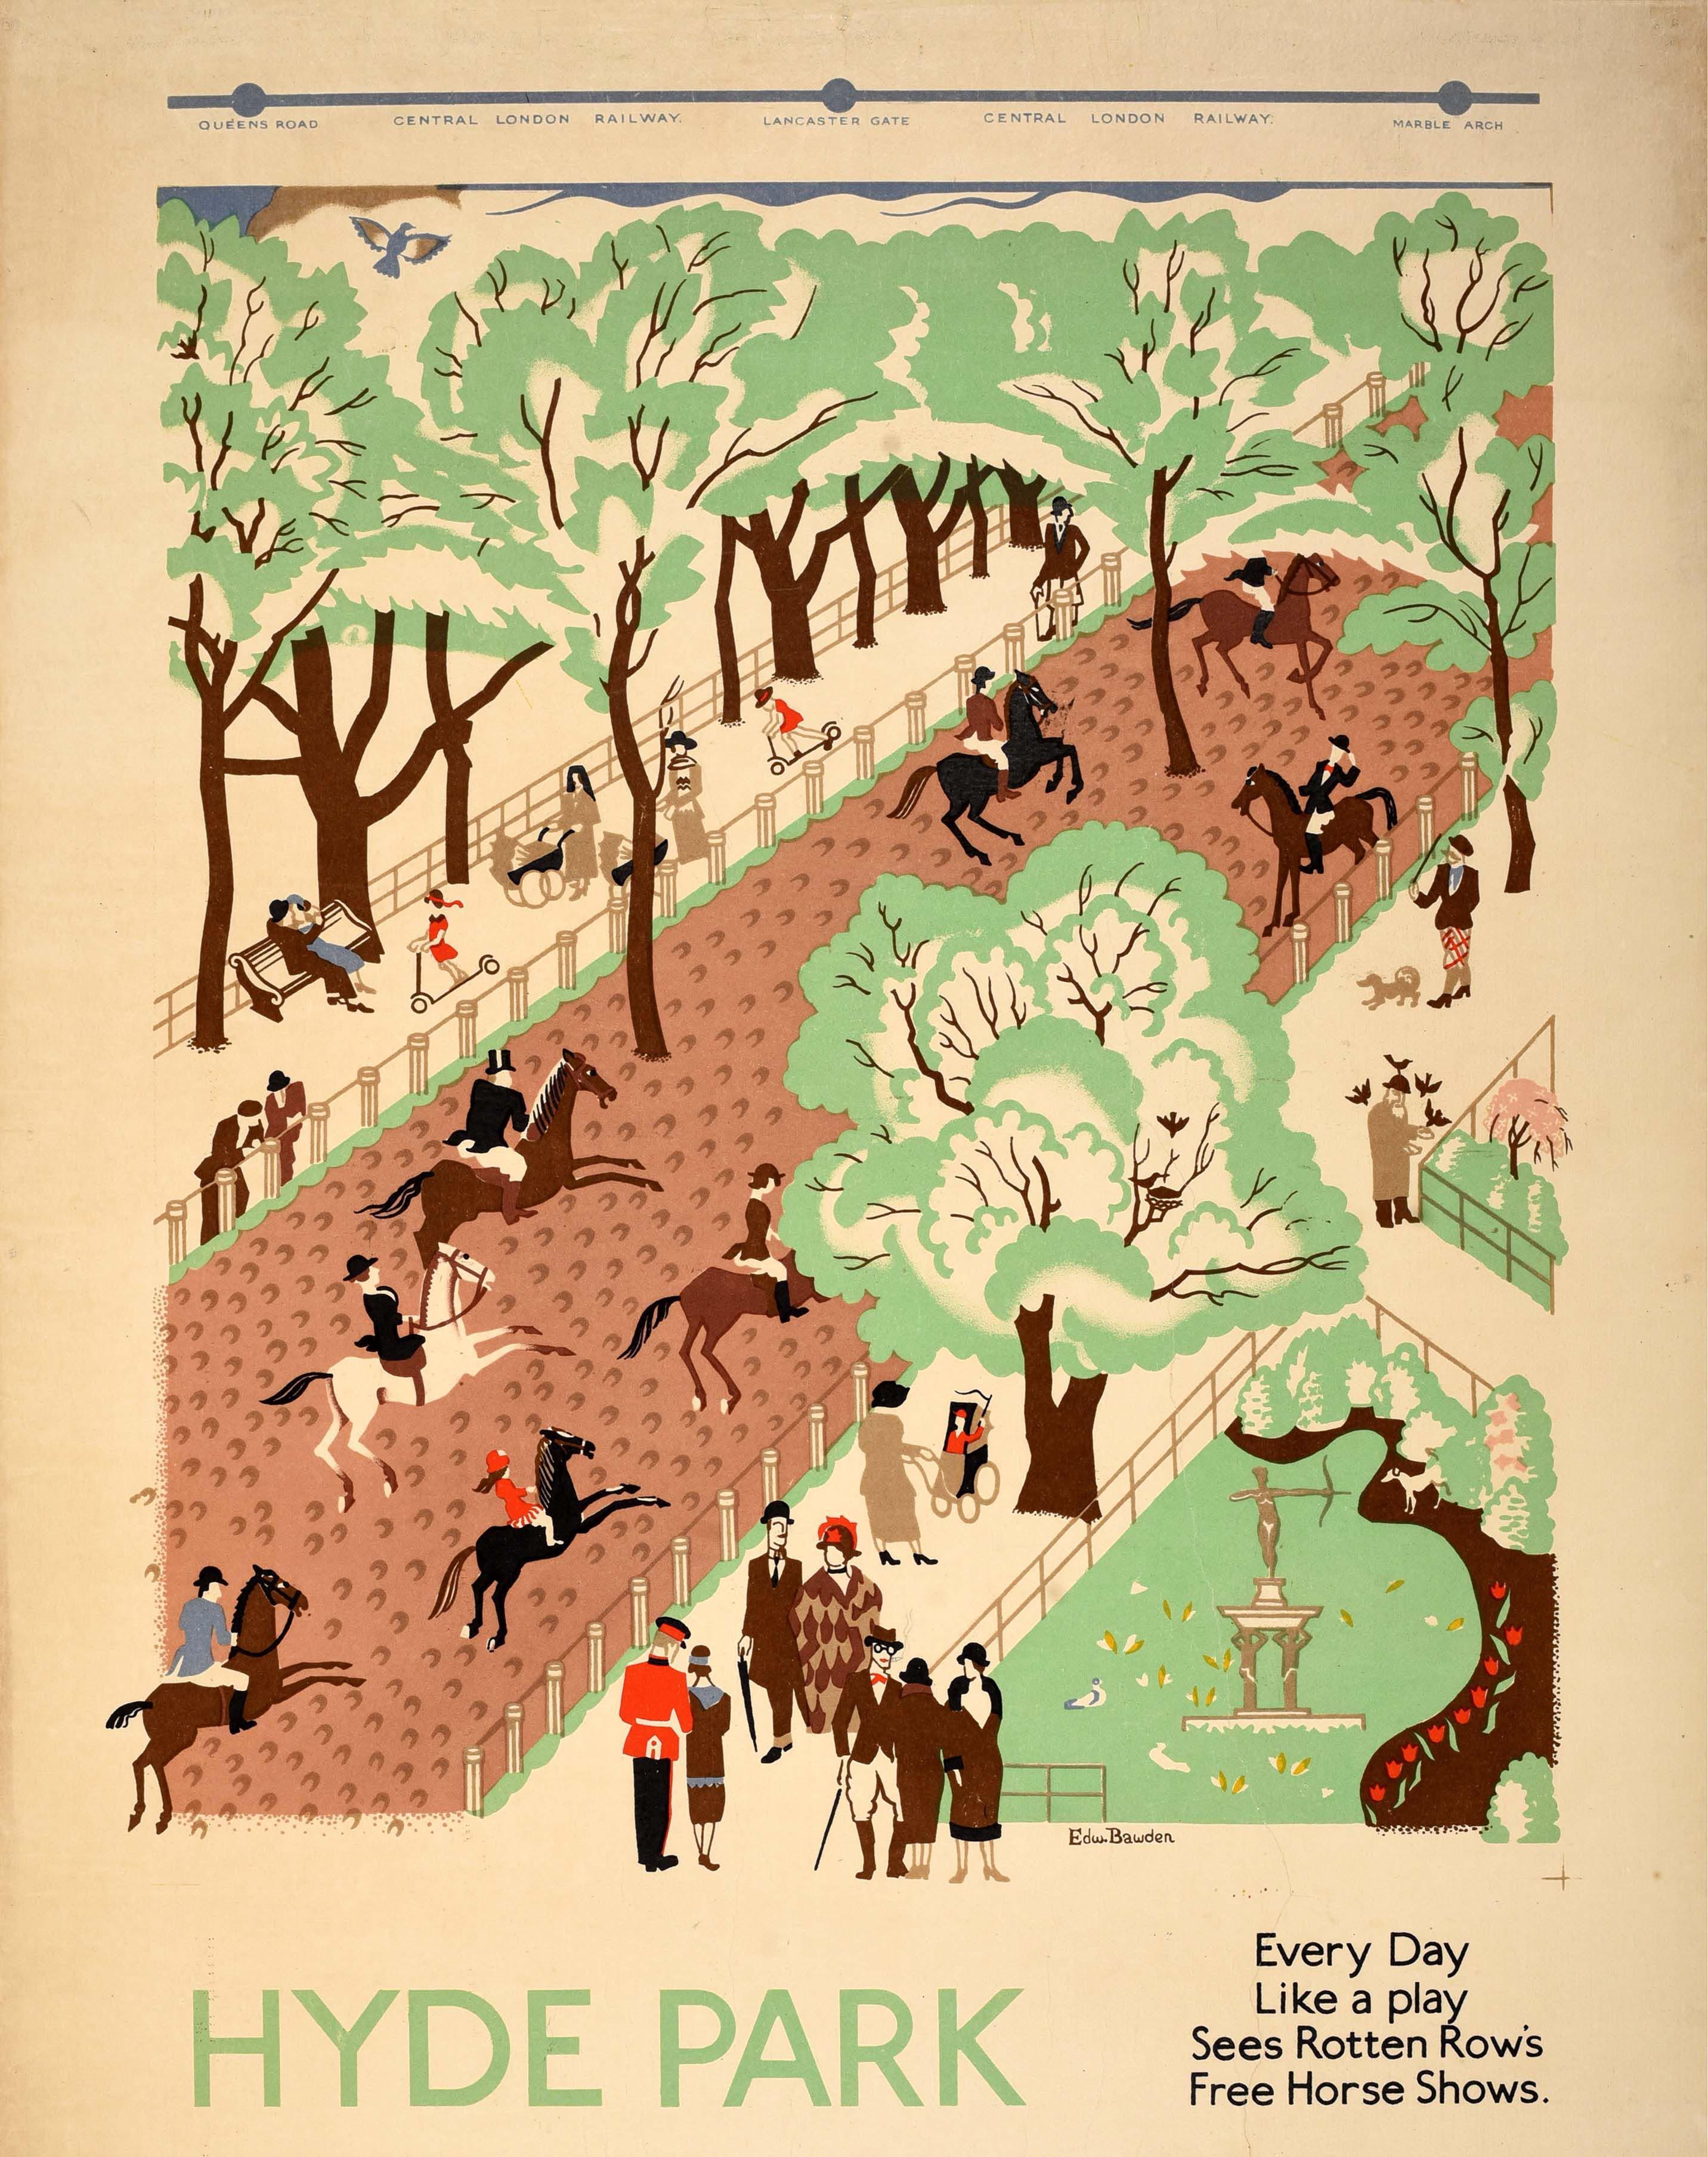 Original antique London Underground poster for Hyde Park The Stage of London Life Free Orators, Free Flower Shows, Free Bands, Free Air, Free Society featuring artwork by the English graphic artist, illustrator and painter Edward Bawden (1903-1989)